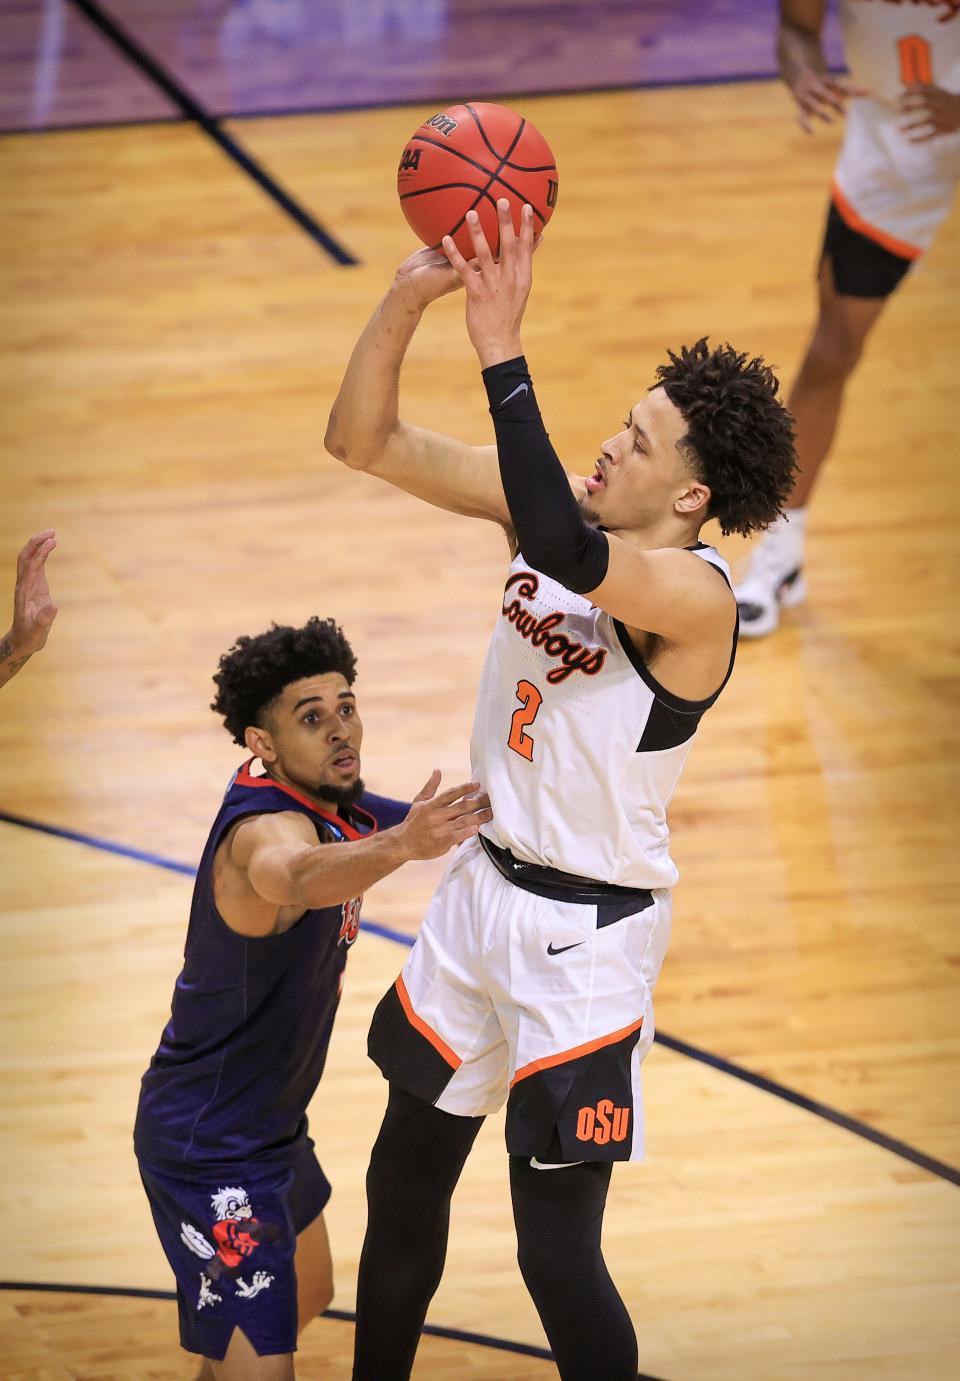 Oklahoma State's Cade Cunningham makes a jump shot against Liberty during the NCAA tournament March 19, 2021 in Indianapolis.